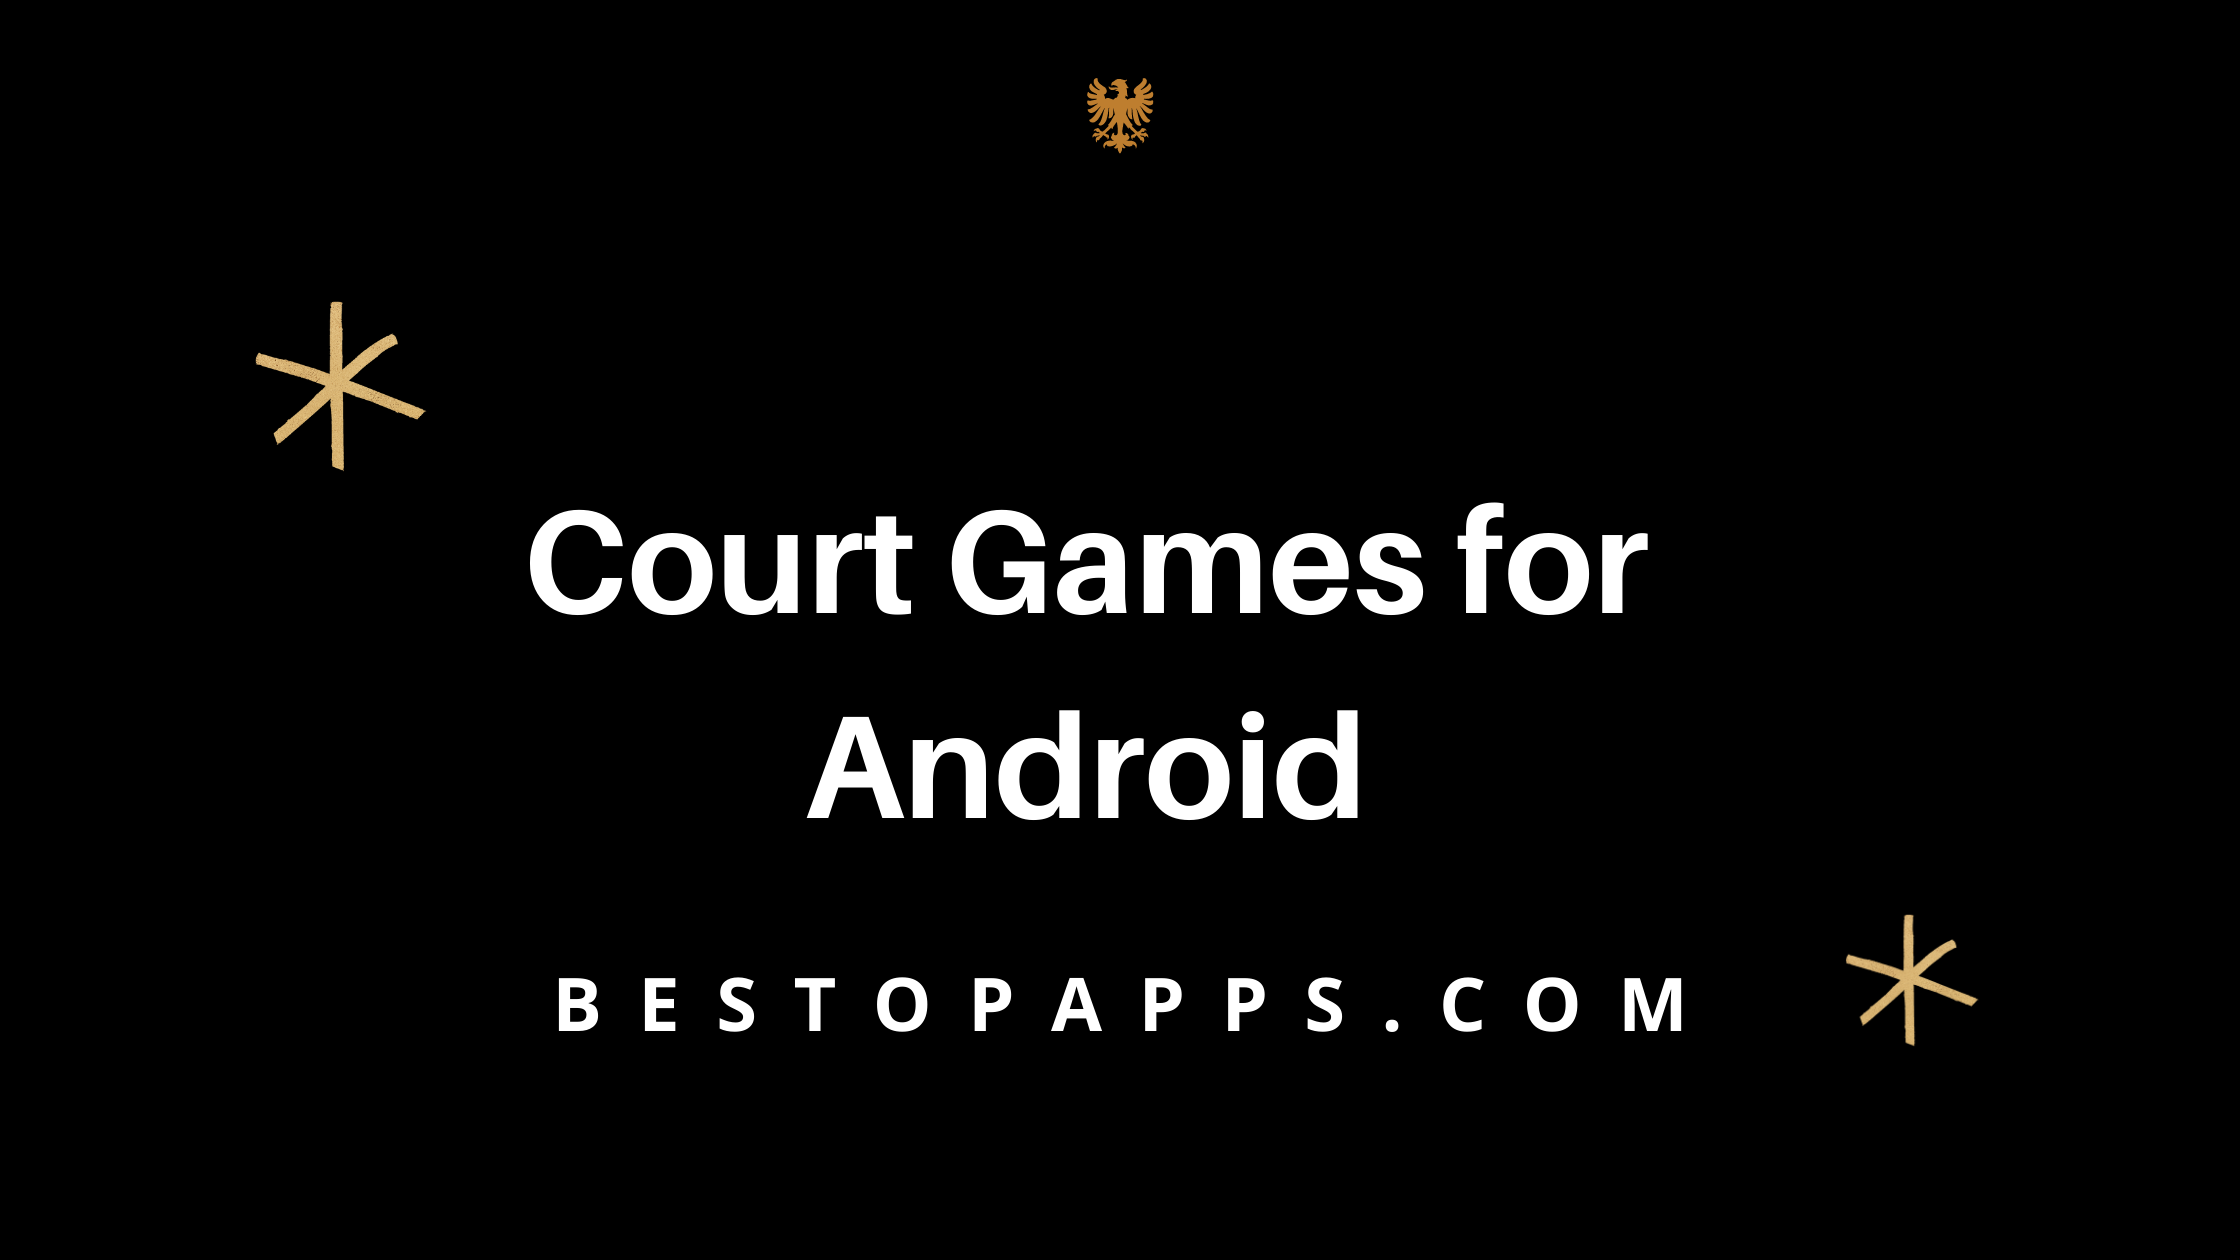 Court Games for Android